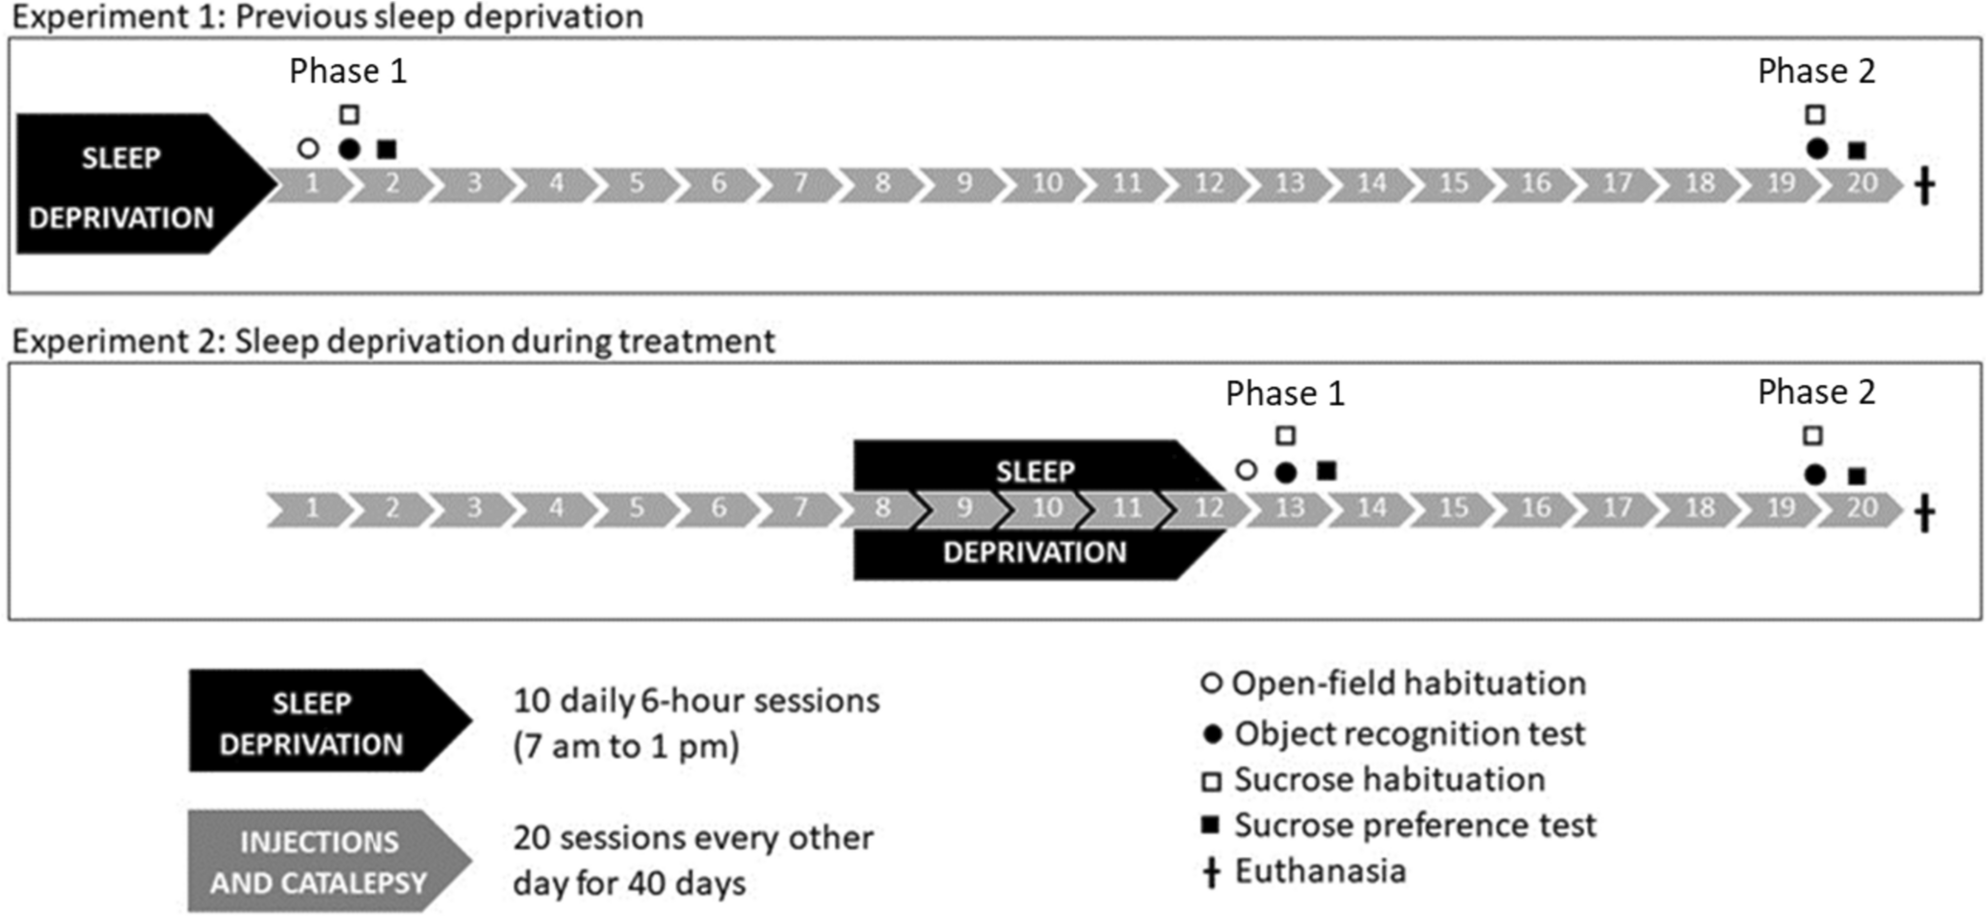 Sleep deprivation induces late deleterious effects in a pharmacological model of Parkinsonism